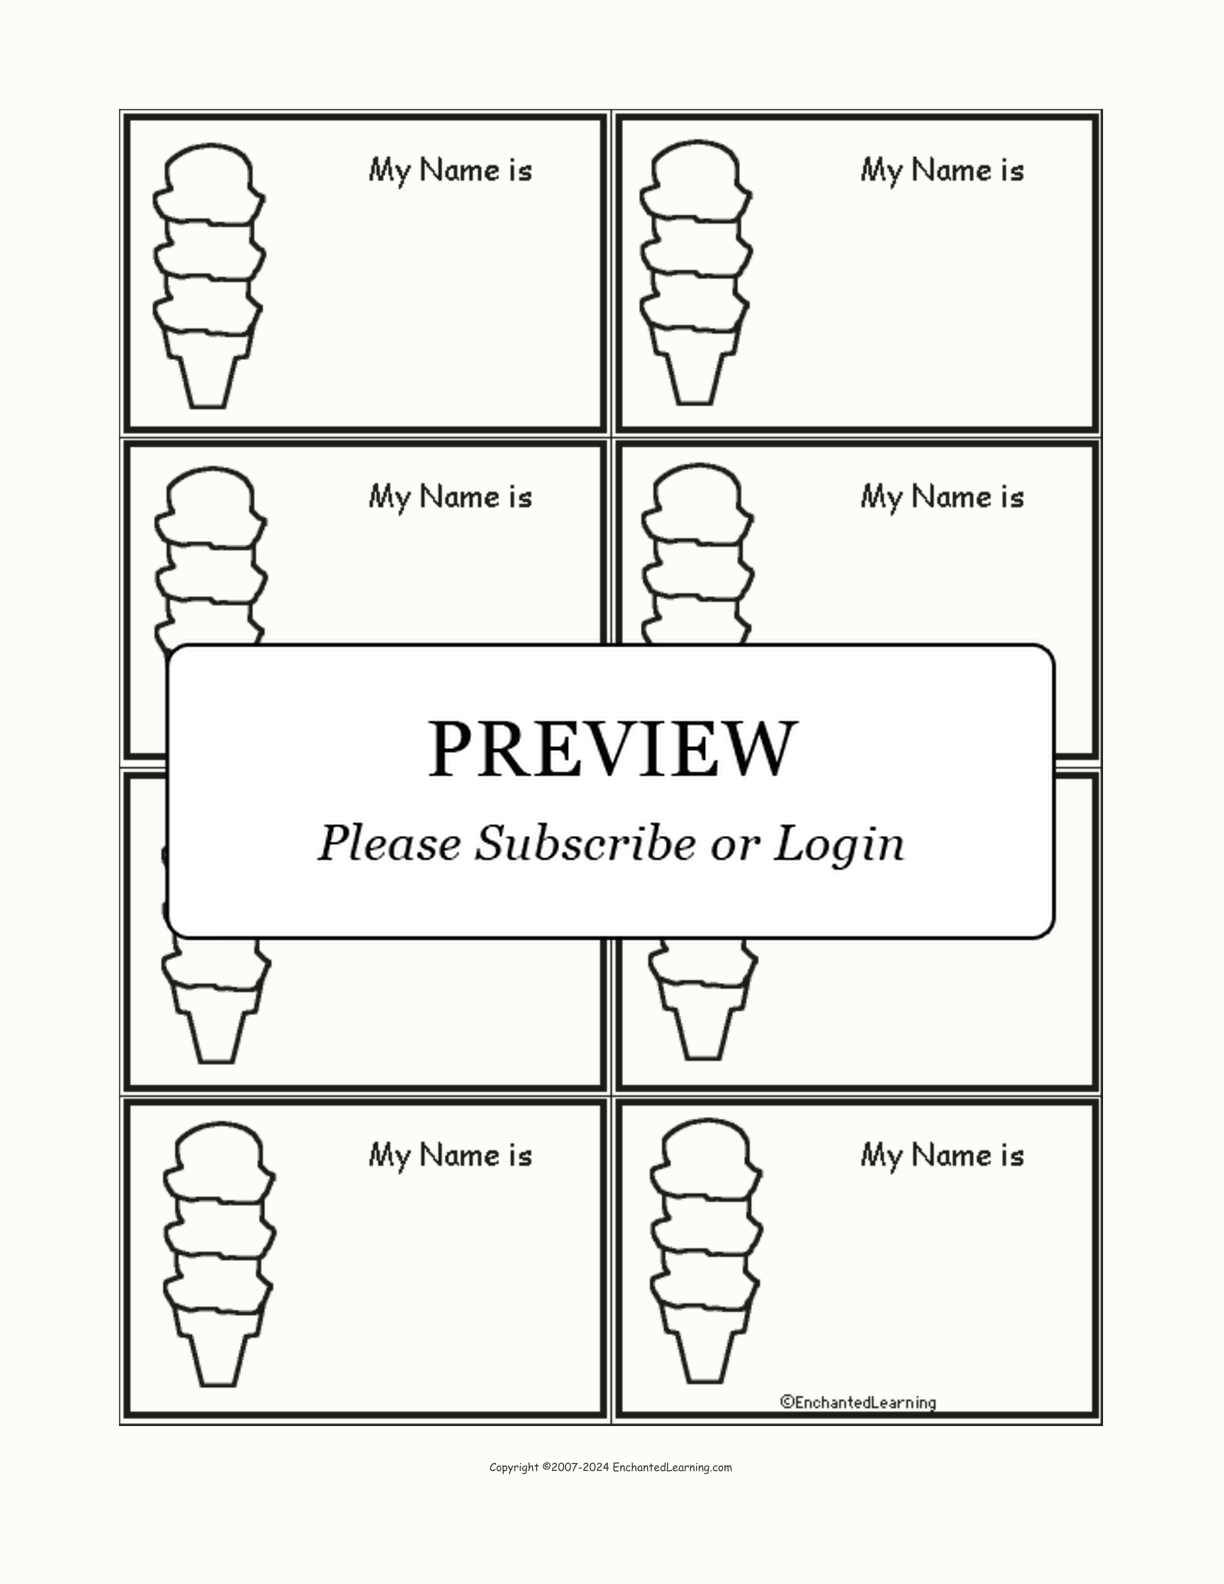 Ice Cream Nametags interactive printout page 1